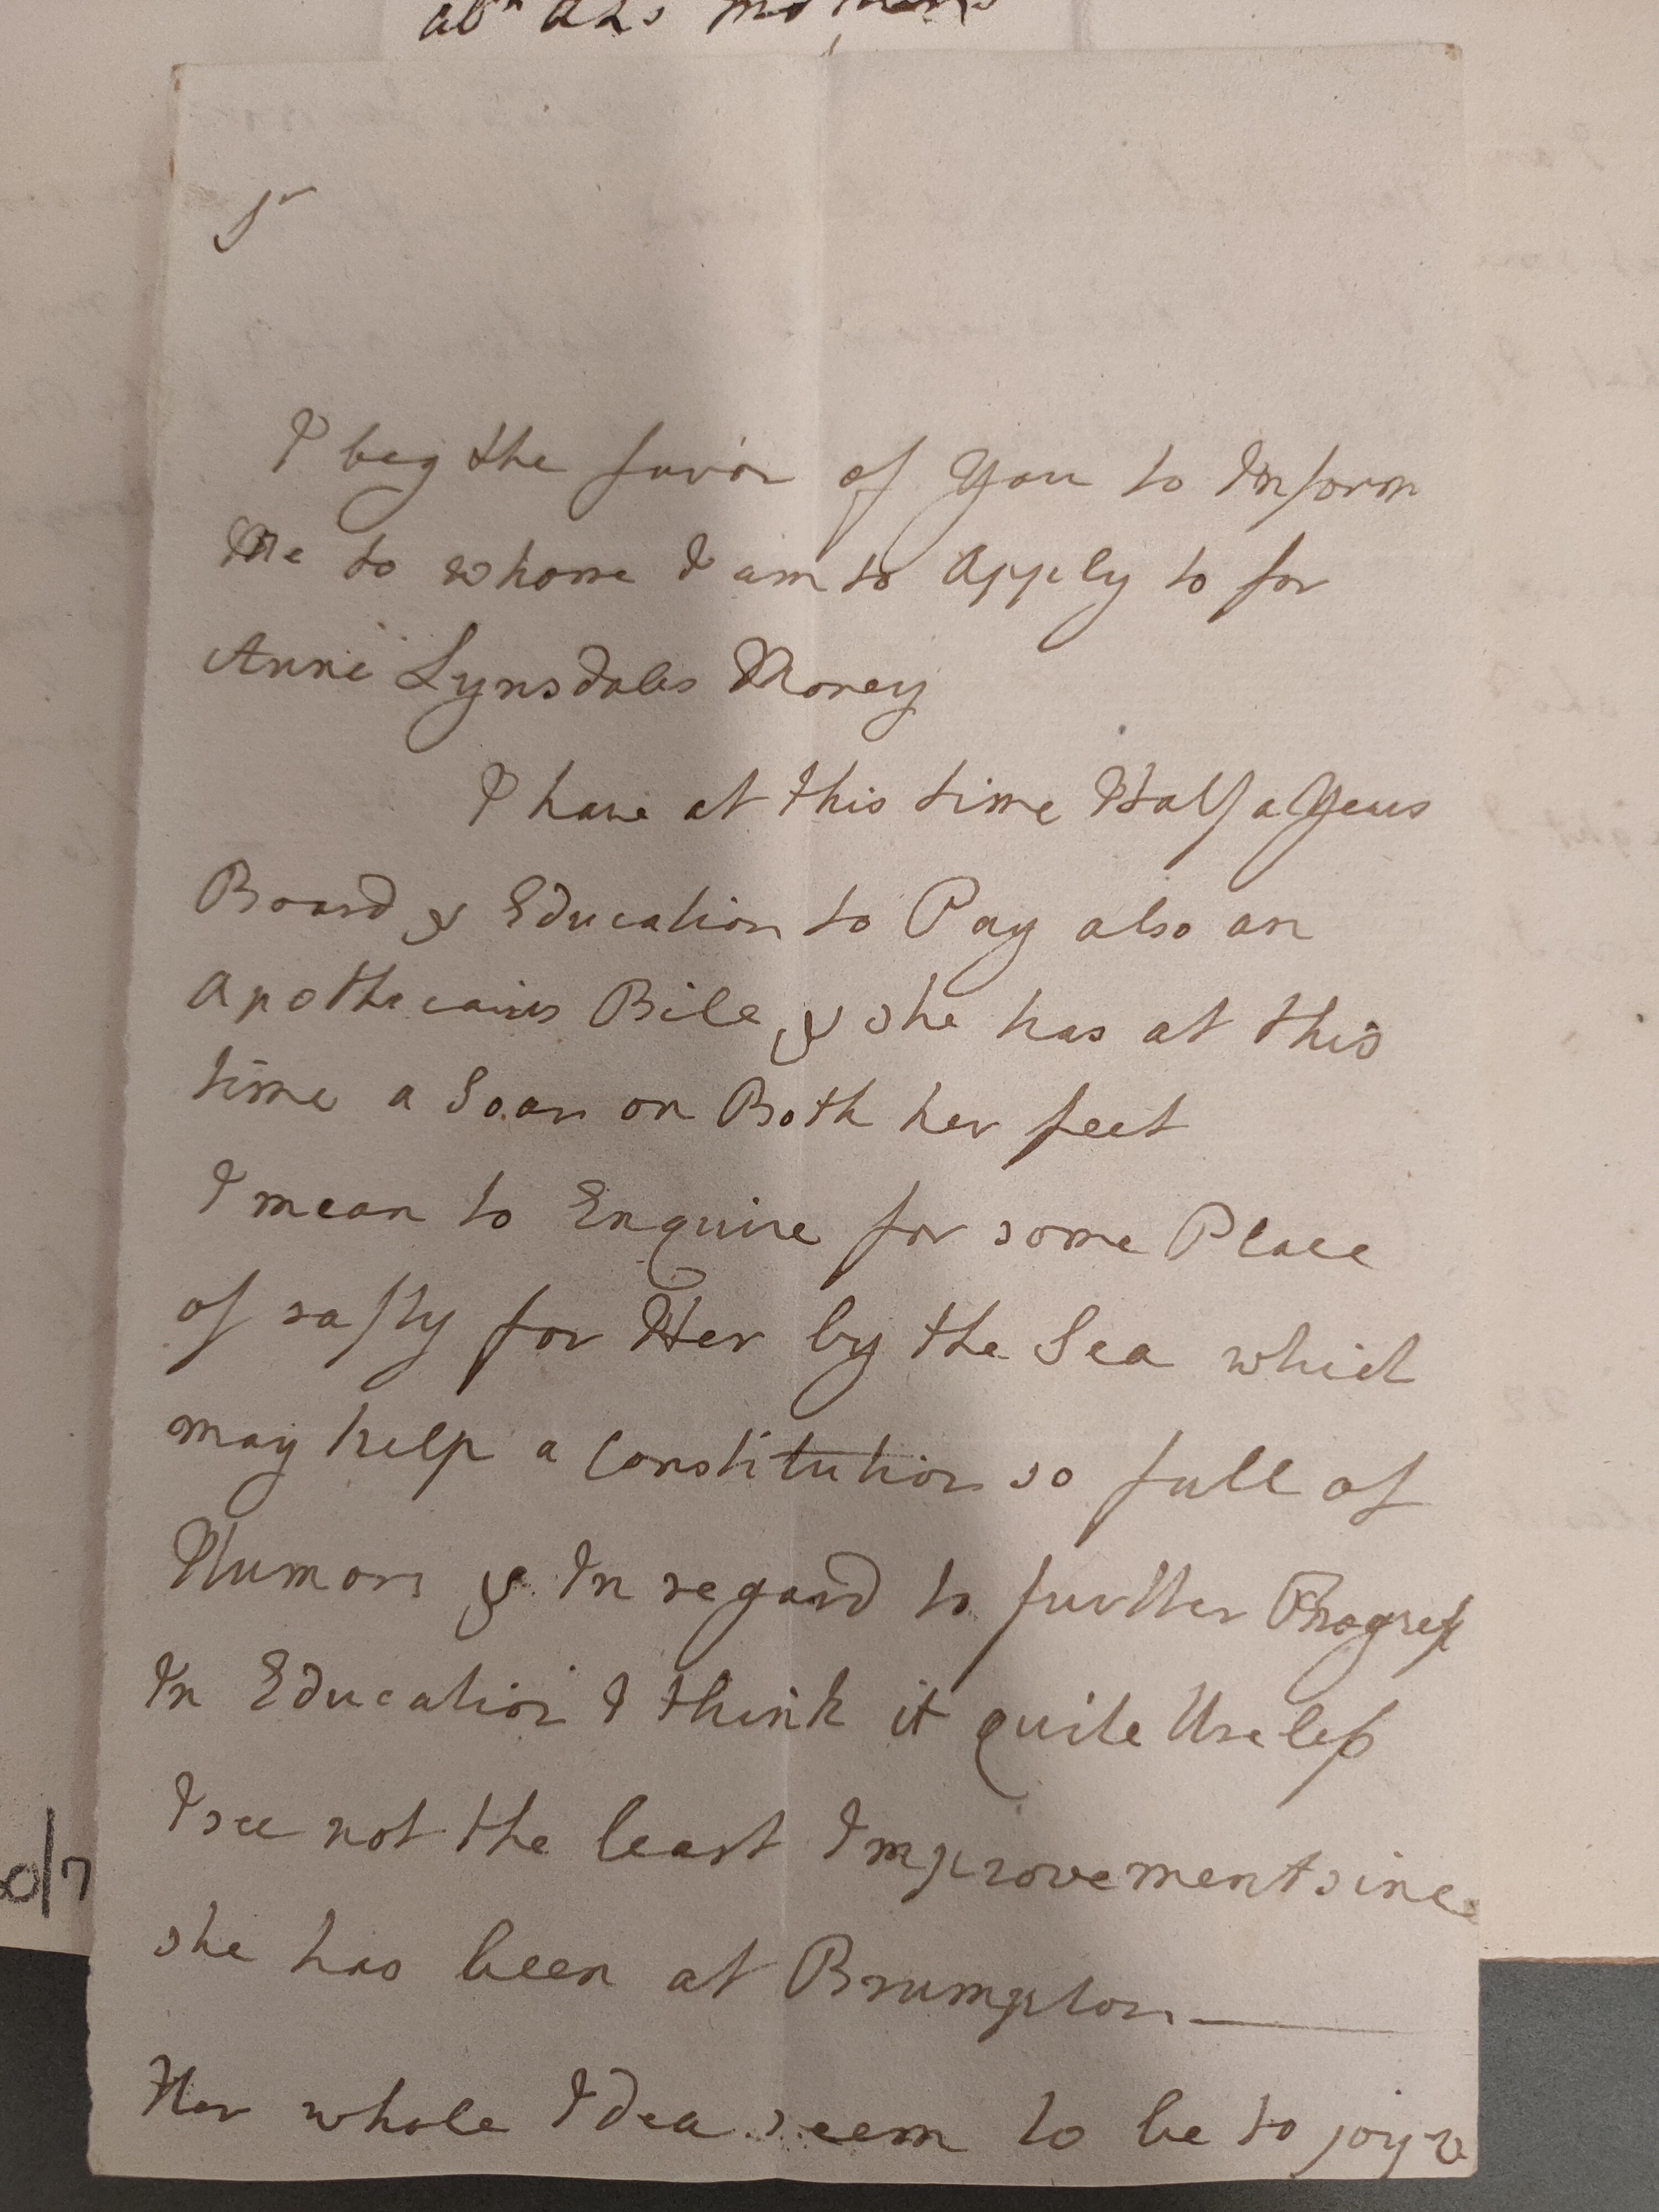 Image #1 of letter: Elizabeth Lister to [?Executors of Dr John Taylour’s will], 22 January 1801